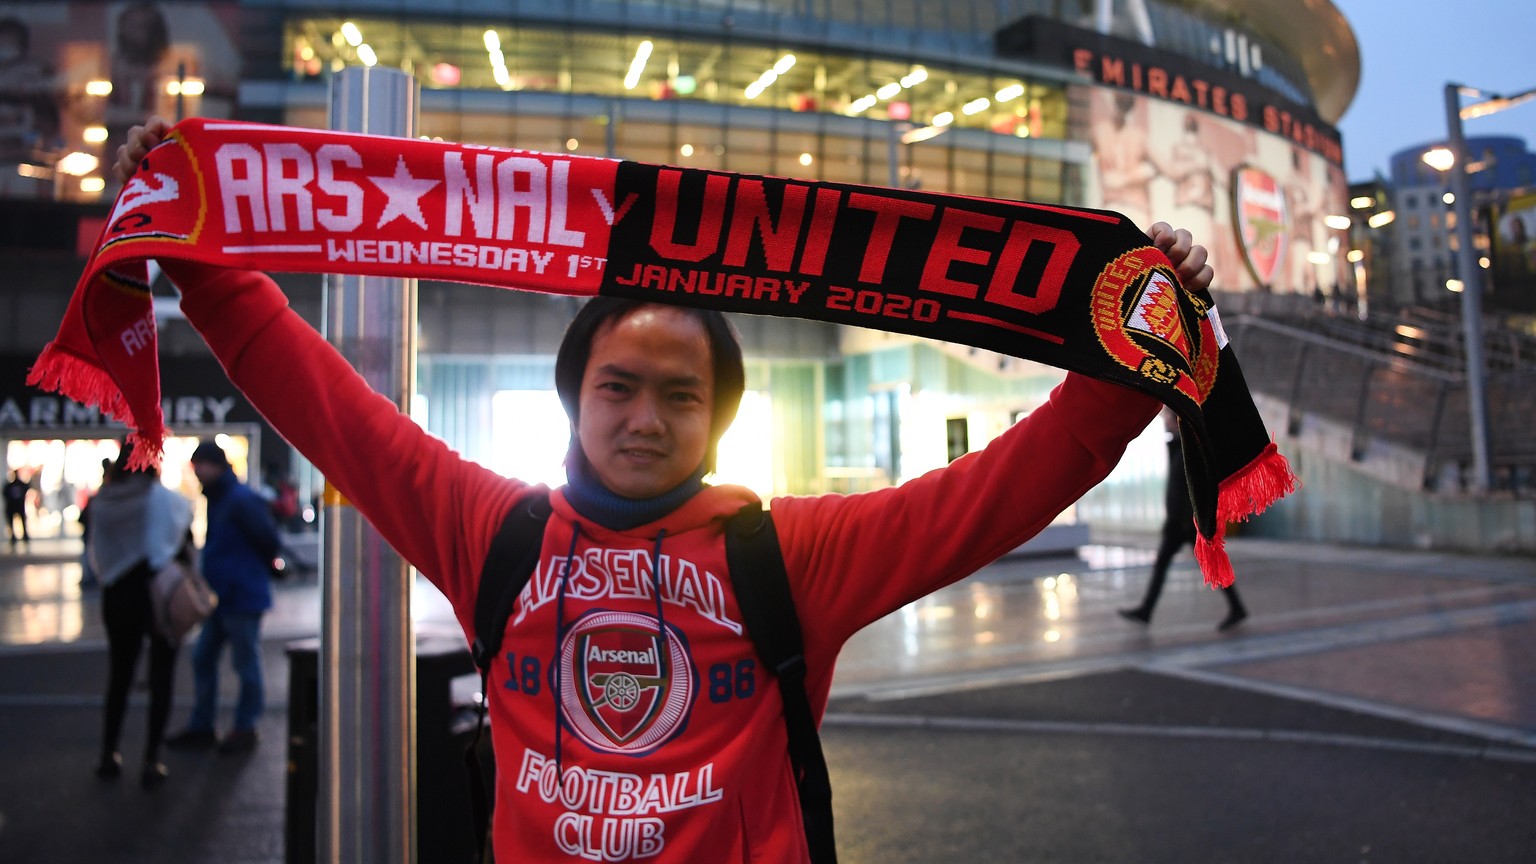 epa08097923 An Arsenal fan arrives at the Emirates Stadium ahead of the English Premier League soccer match Arsenal vs Manchester United in London, Britain, 01 January 2020. EPA/ANDY RAIN EDITORIAL US ...